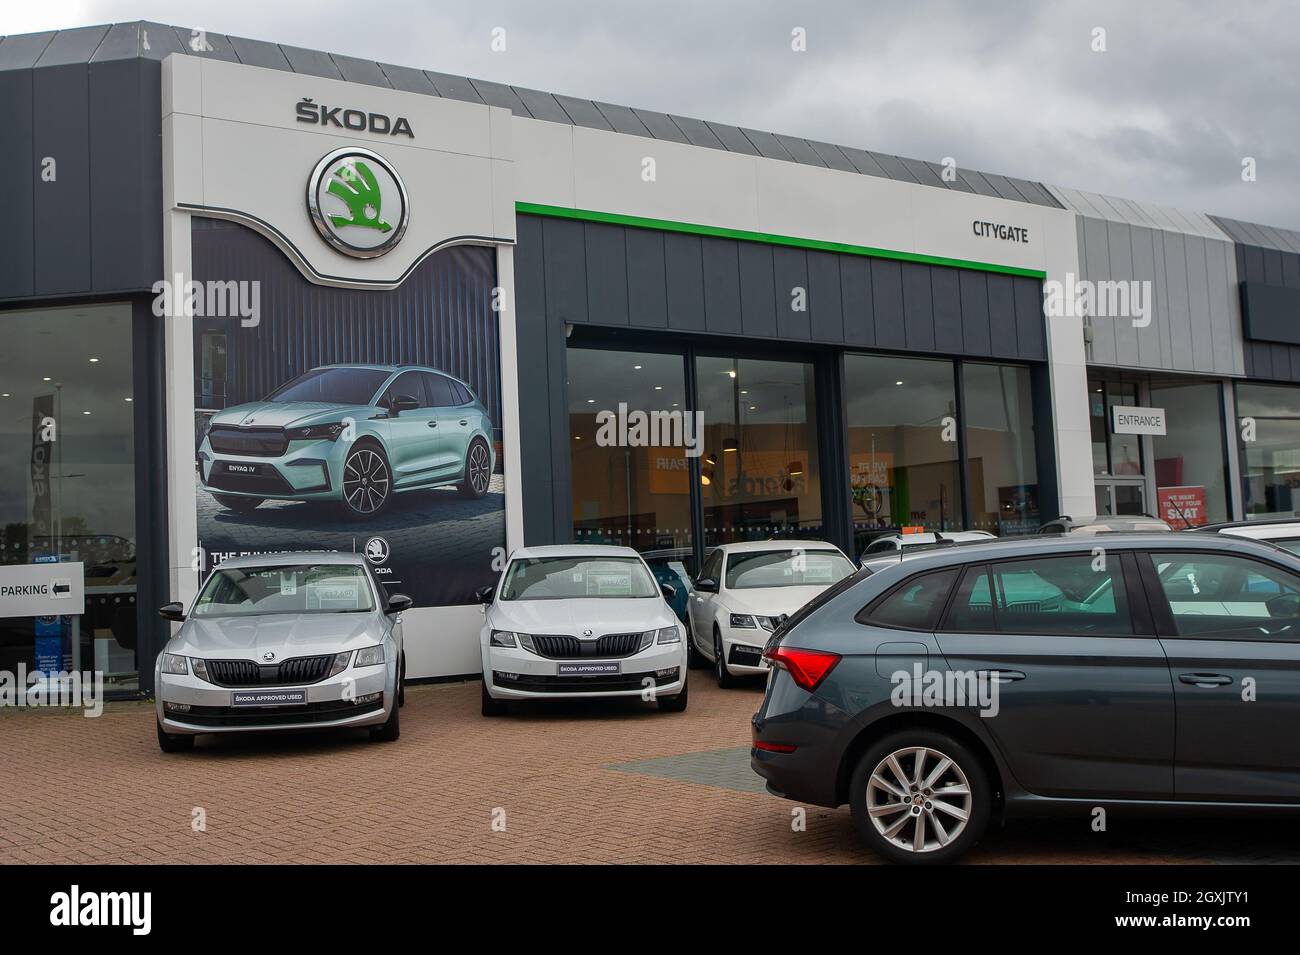 Slough, Berkshire, UK. 5th October, 2021. The Skoda car dealership on the A4 in Slough. New figures released by the Society of Motor Manufacturers and Traders have reported that new car sales plummeted 34.4% year on year in September which is traditionally one of the busiest months for the industry. Used car sales on the other hand have been strong as the worldwide  shortage of computer chips is resulting in long waiting lists for new cars . Credit: Maureen McLean/Alamy Live News Stock Photo